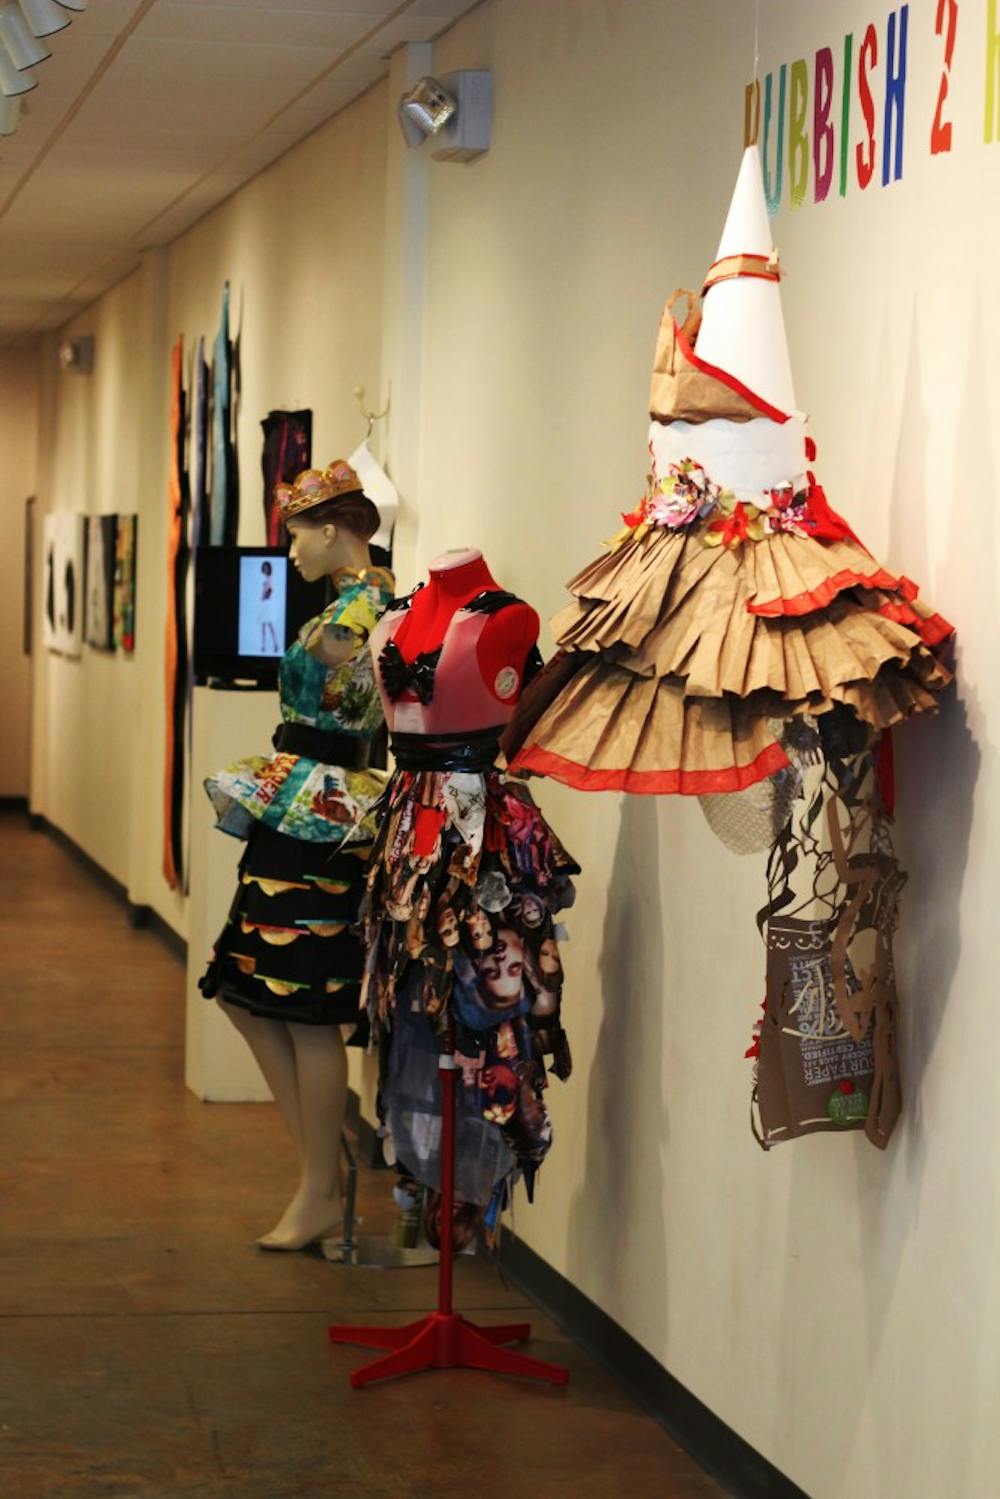 Dresses made solely from recycled materials are featured at the FRANK Gallery's current exhibition: Rubbish 2 Runway, on display since May 7th until July 7th. Designers who have submitted their work for this "trashion" show and exhibit range from high school to professional level artists.